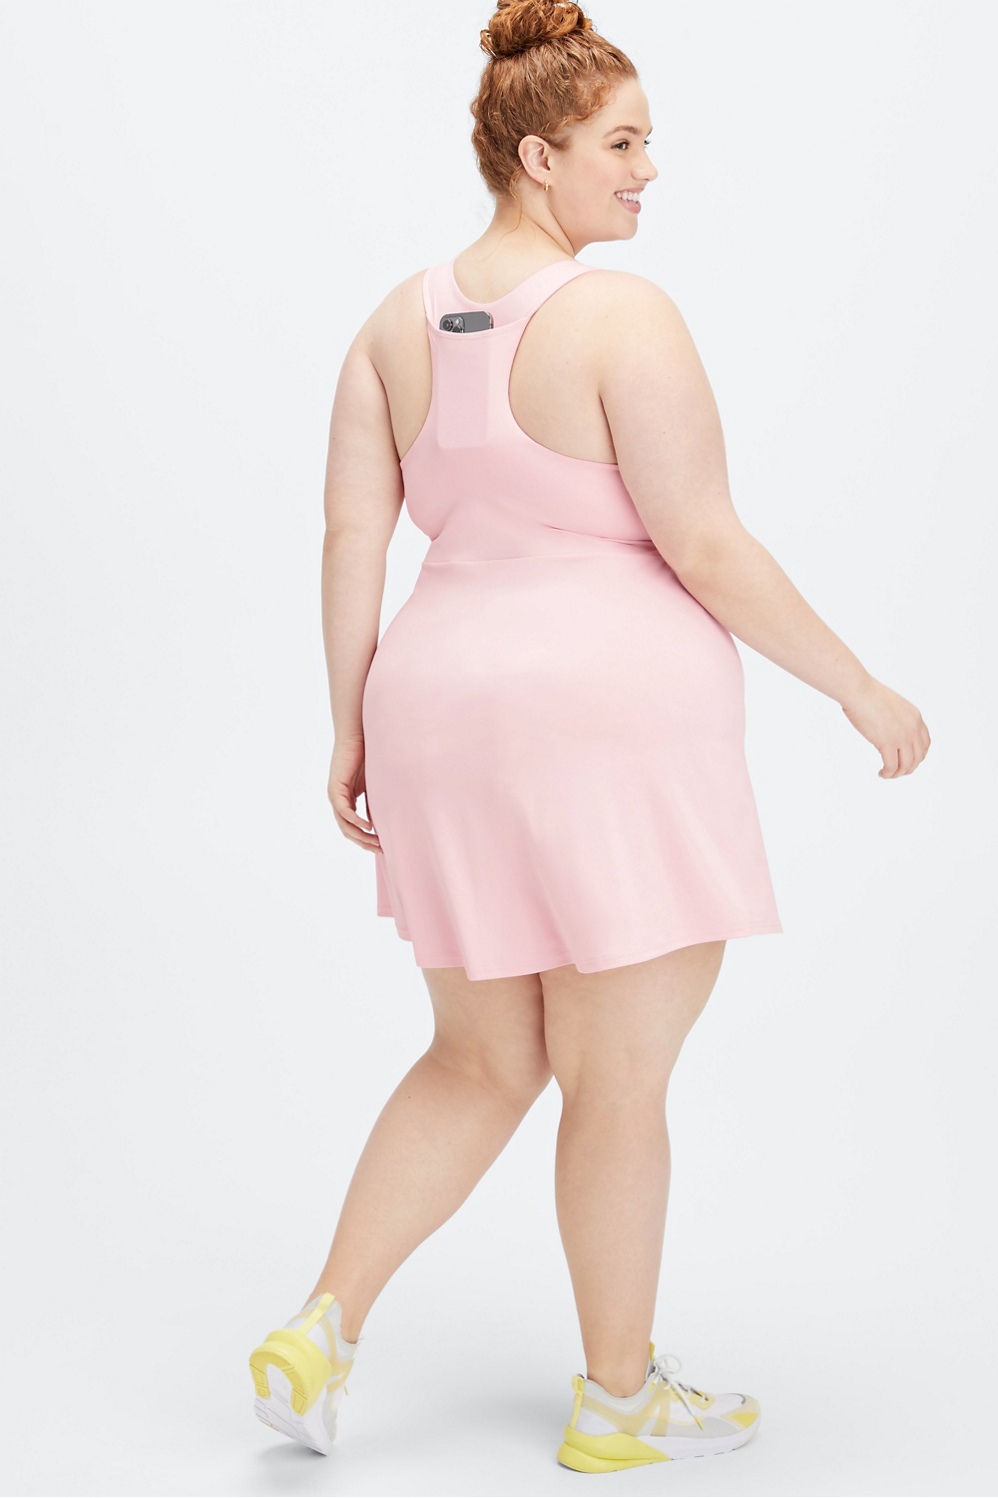 Fabletics NWT Hot Pink Strappy Sport Mini Jersey Dress $90 Fitted